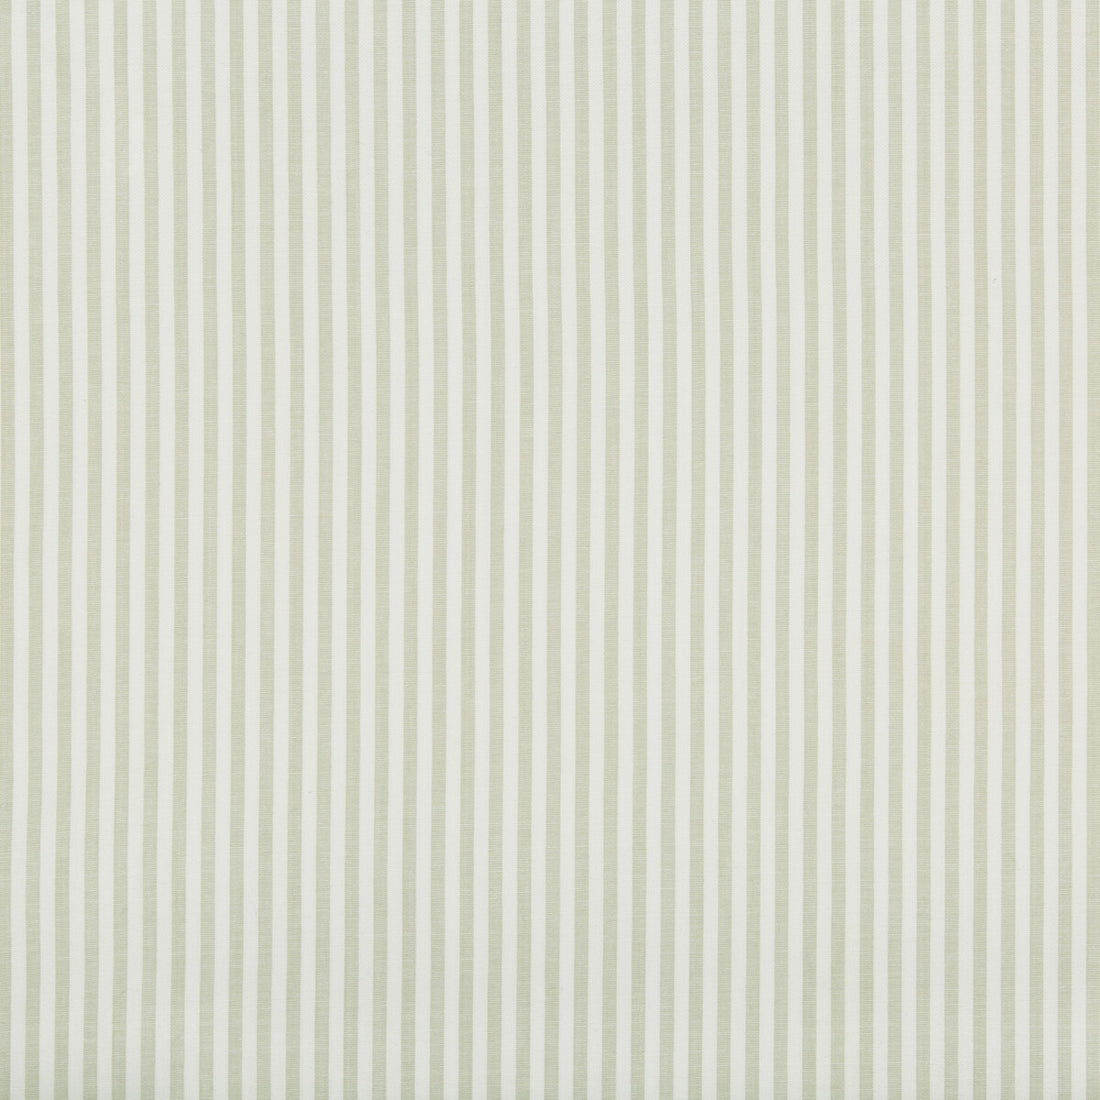 Cap Ferrat Stripe fabric in leaf color - pattern 2018146.123.0 - by Lee Jofa in the Suzanne Kasler The Riviera collection